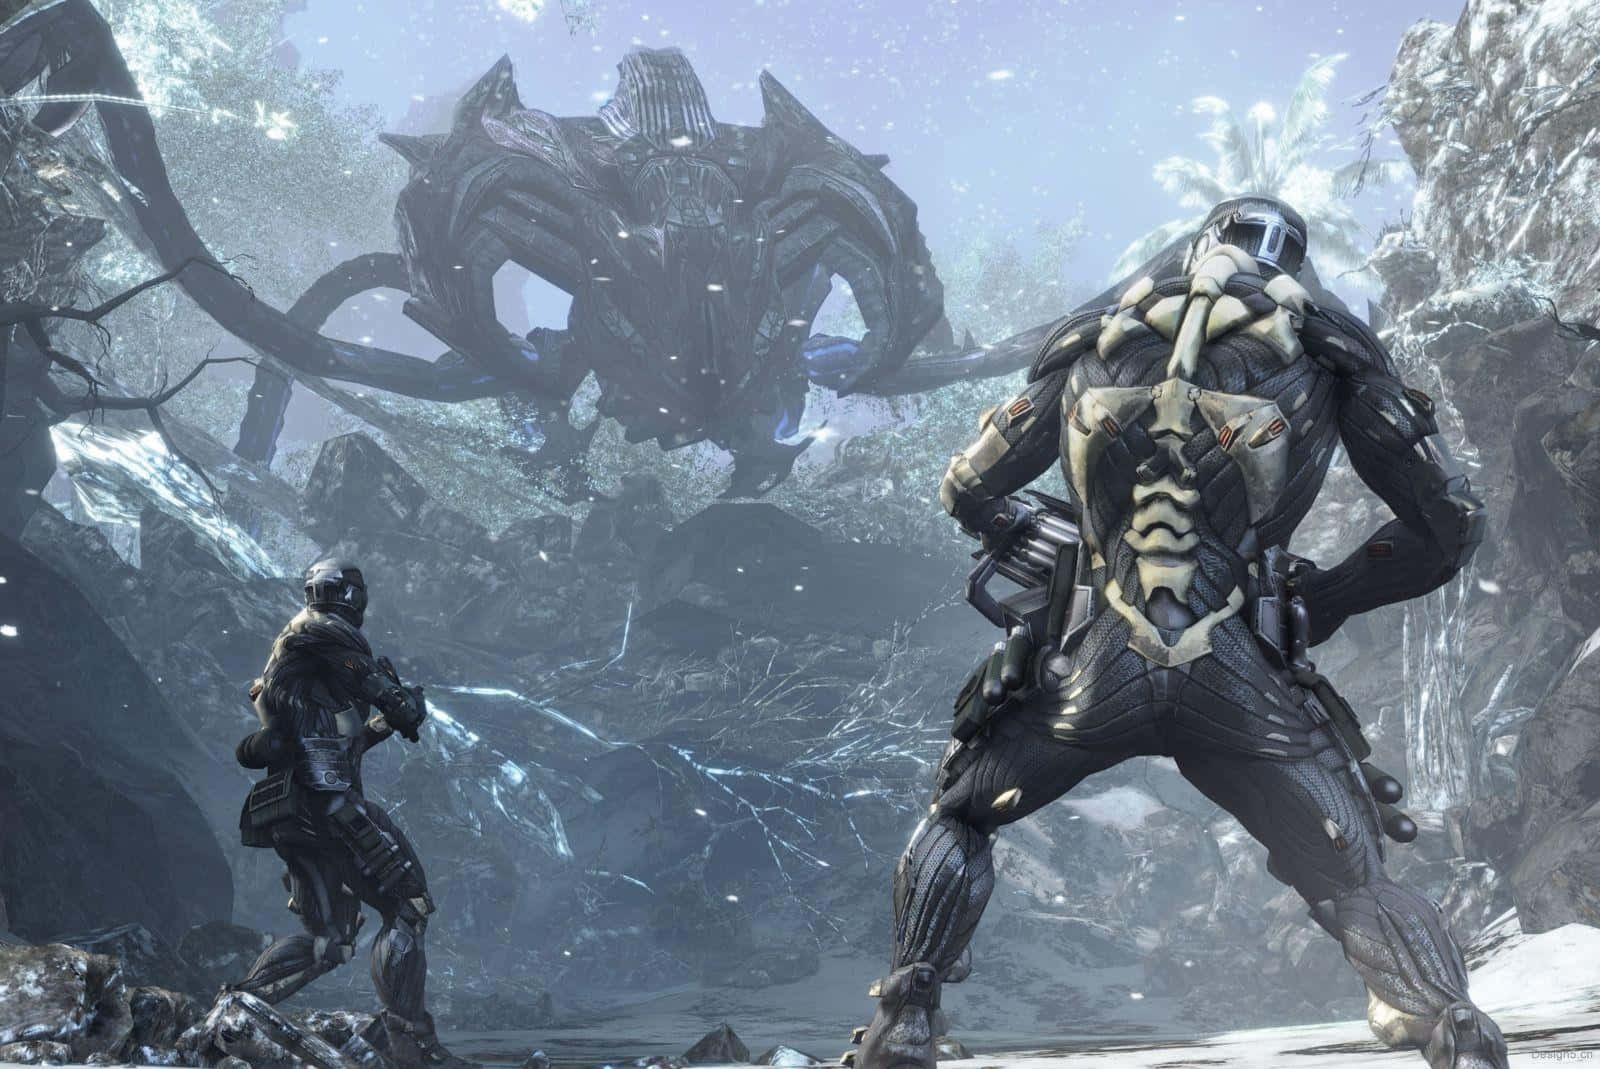 Crysis Frozen Landscape With Alien And Soldiers Wallpaper